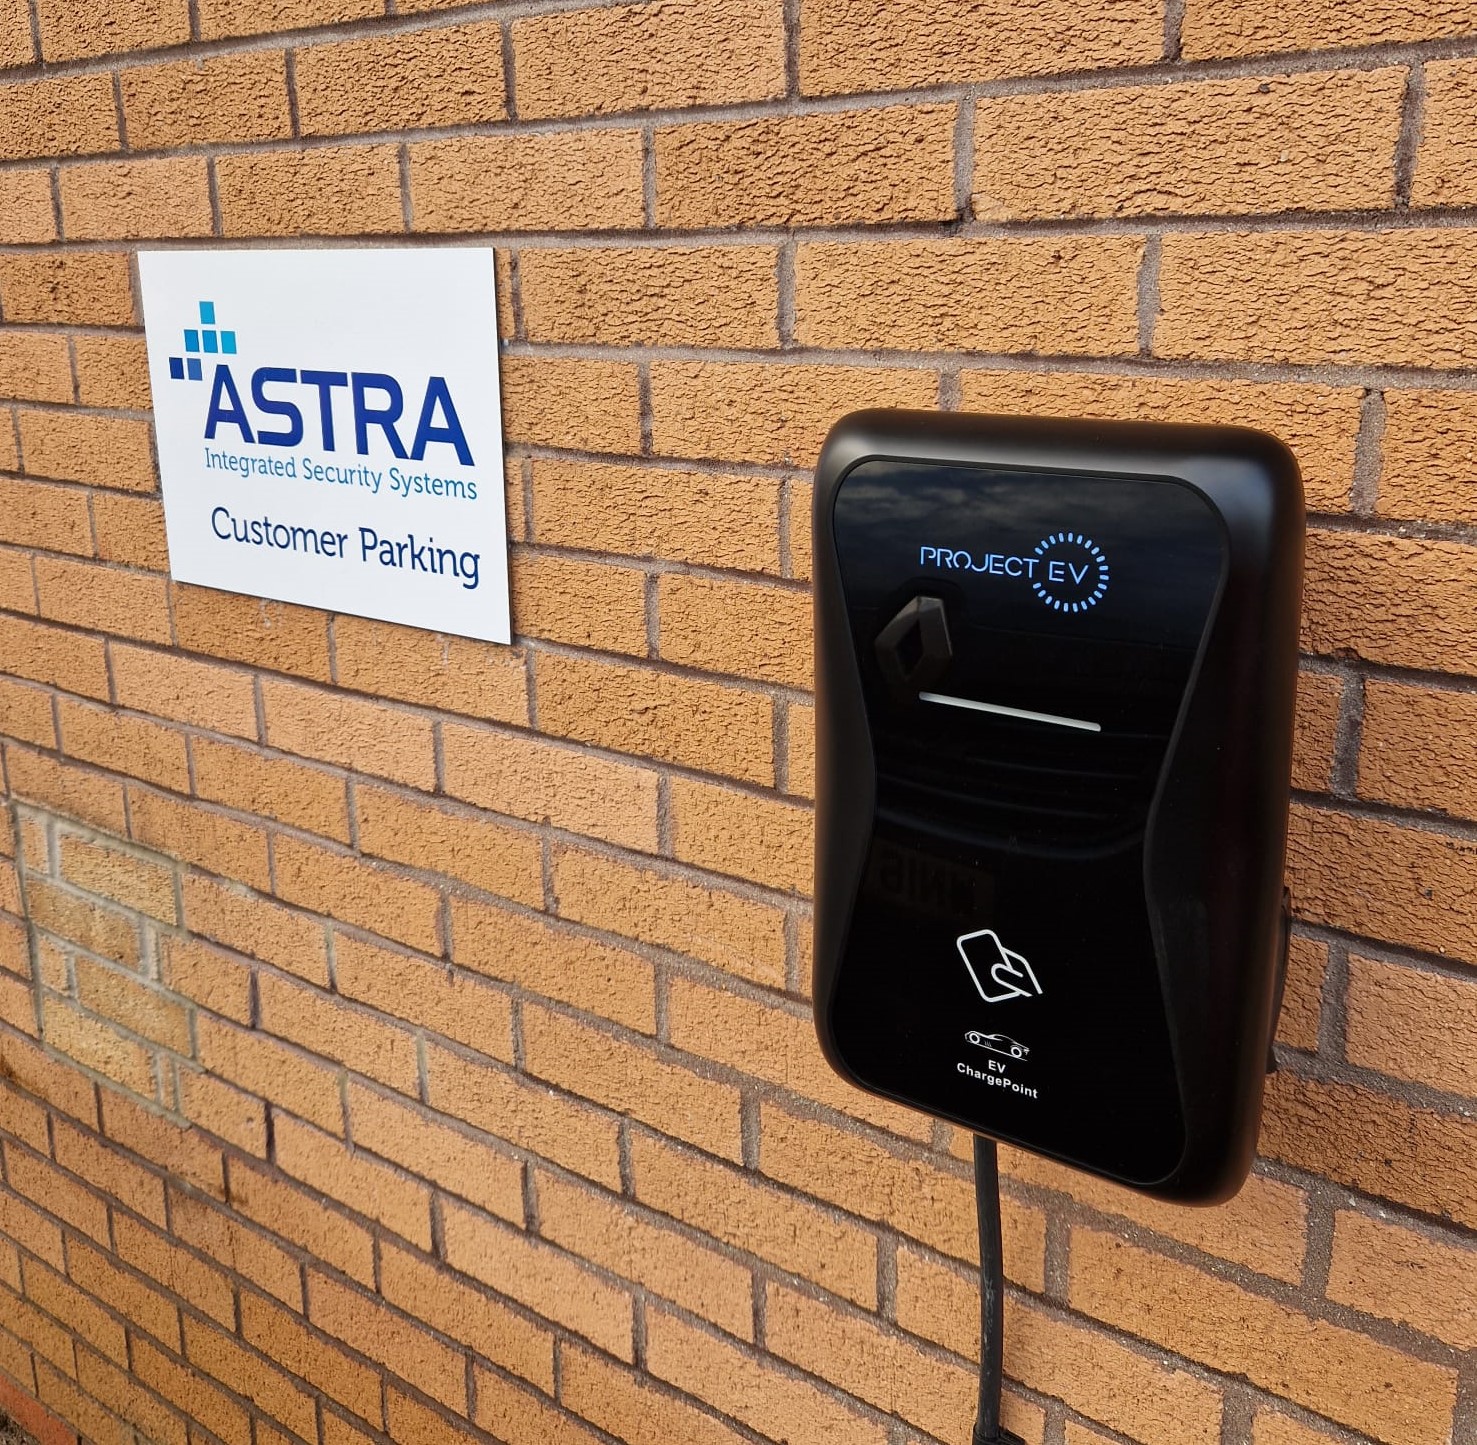 Clients, partners and customers can charge their cars up when visiting us